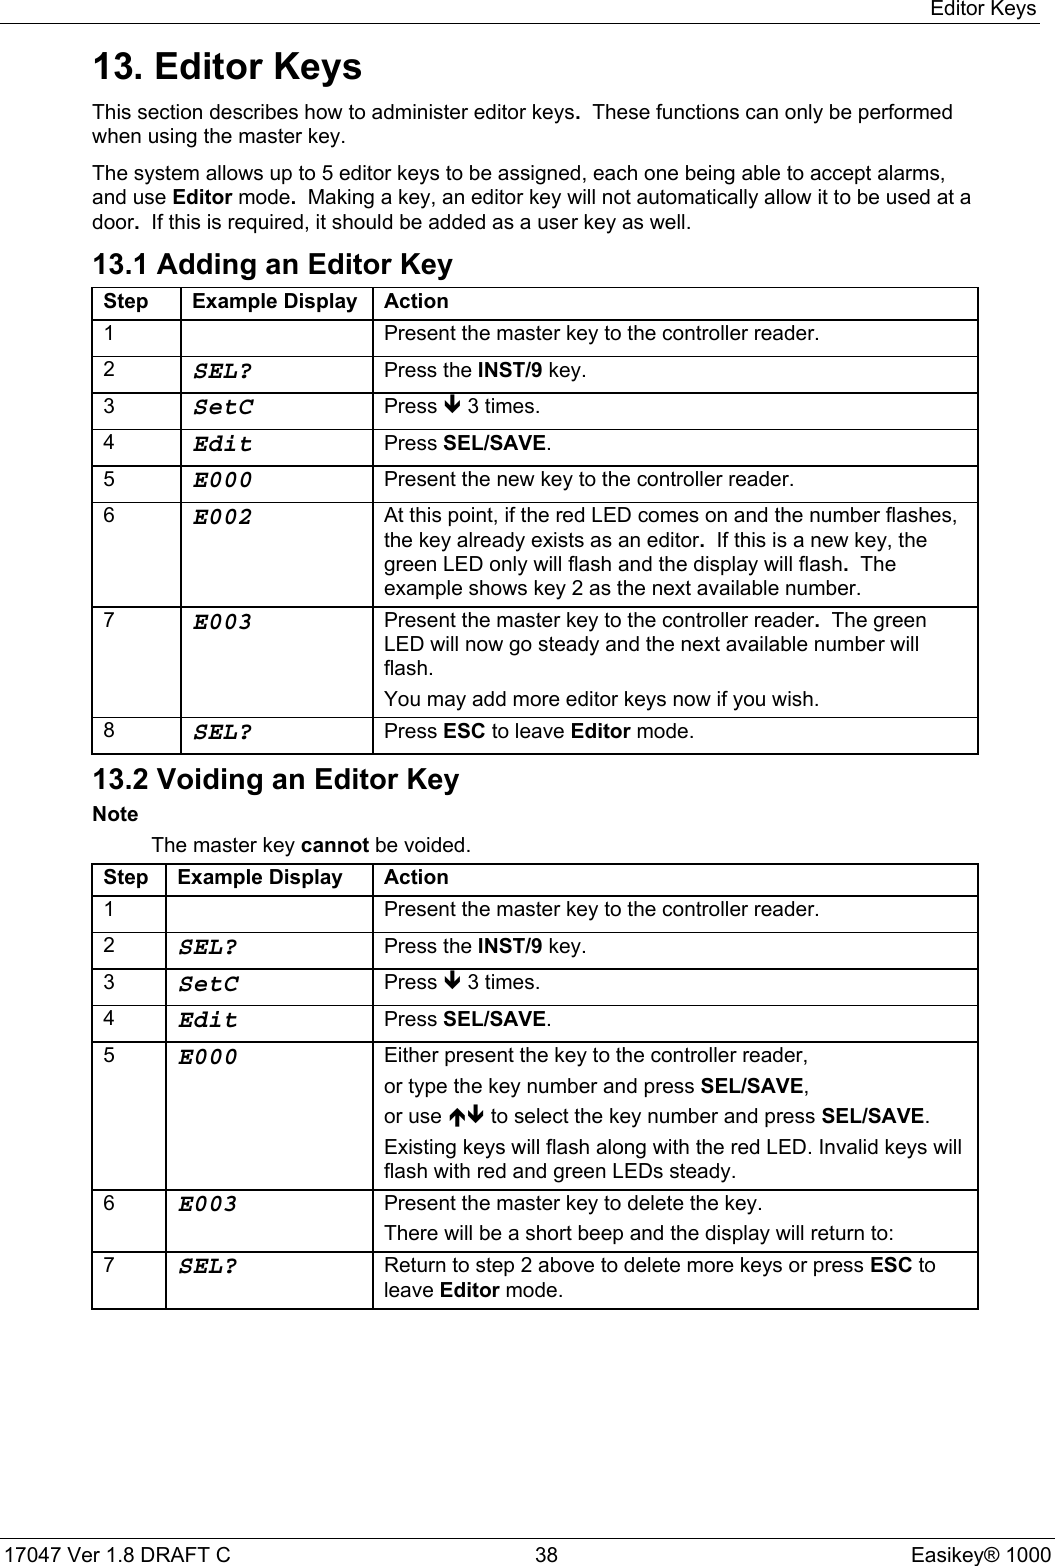 Editor Keys17047 Ver 1.8 DRAFT C  38 Easikey® 100013. Editor KeysThis section describes how to administer editor keys.  These functions can only be performedwhen using the master key.The system allows up to 5 editor keys to be assigned, each one being able to accept alarms,and use Editor mode.  Making a key, an editor key will not automatically allow it to be used at adoor.  If this is required, it should be added as a user key as well.13.1 Adding an Editor KeyStep Example Display Action1 Present the master key to the controller reader.2SEL? Press the INST/9 key.3SetC Press Ð 3 times.4Edit Press SEL/SAVE.5E000 Present the new key to the controller reader.6E002 At this point, if the red LED comes on and the number flashes,the key already exists as an editor.  If this is a new key, thegreen LED only will flash and the display will flash.  Theexample shows key 2 as the next available number.7E003 Present the master key to the controller reader.  The greenLED will now go steady and the next available number willflash.You may add more editor keys now if you wish.8SEL? Press ESC to leave Editor mode.13.2 Voiding an Editor KeyNoteThe master key cannot be voided.Step Example Display Action1 Present the master key to the controller reader.2SEL? Press the INST/9 key.3SetC Press Ð 3 times.4Edit Press SEL/SAVE.5E000 Either present the key to the controller reader,or type the key number and press SEL/SAVE,or use ÏÐ to select the key number and press SEL/SAVE.Existing keys will flash along with the red LED. Invalid keys willflash with red and green LEDs steady.6E003 Present the master key to delete the key.There will be a short beep and the display will return to:7SEL? Return to step 2 above to delete more keys or press ESC toleave Editor mode.